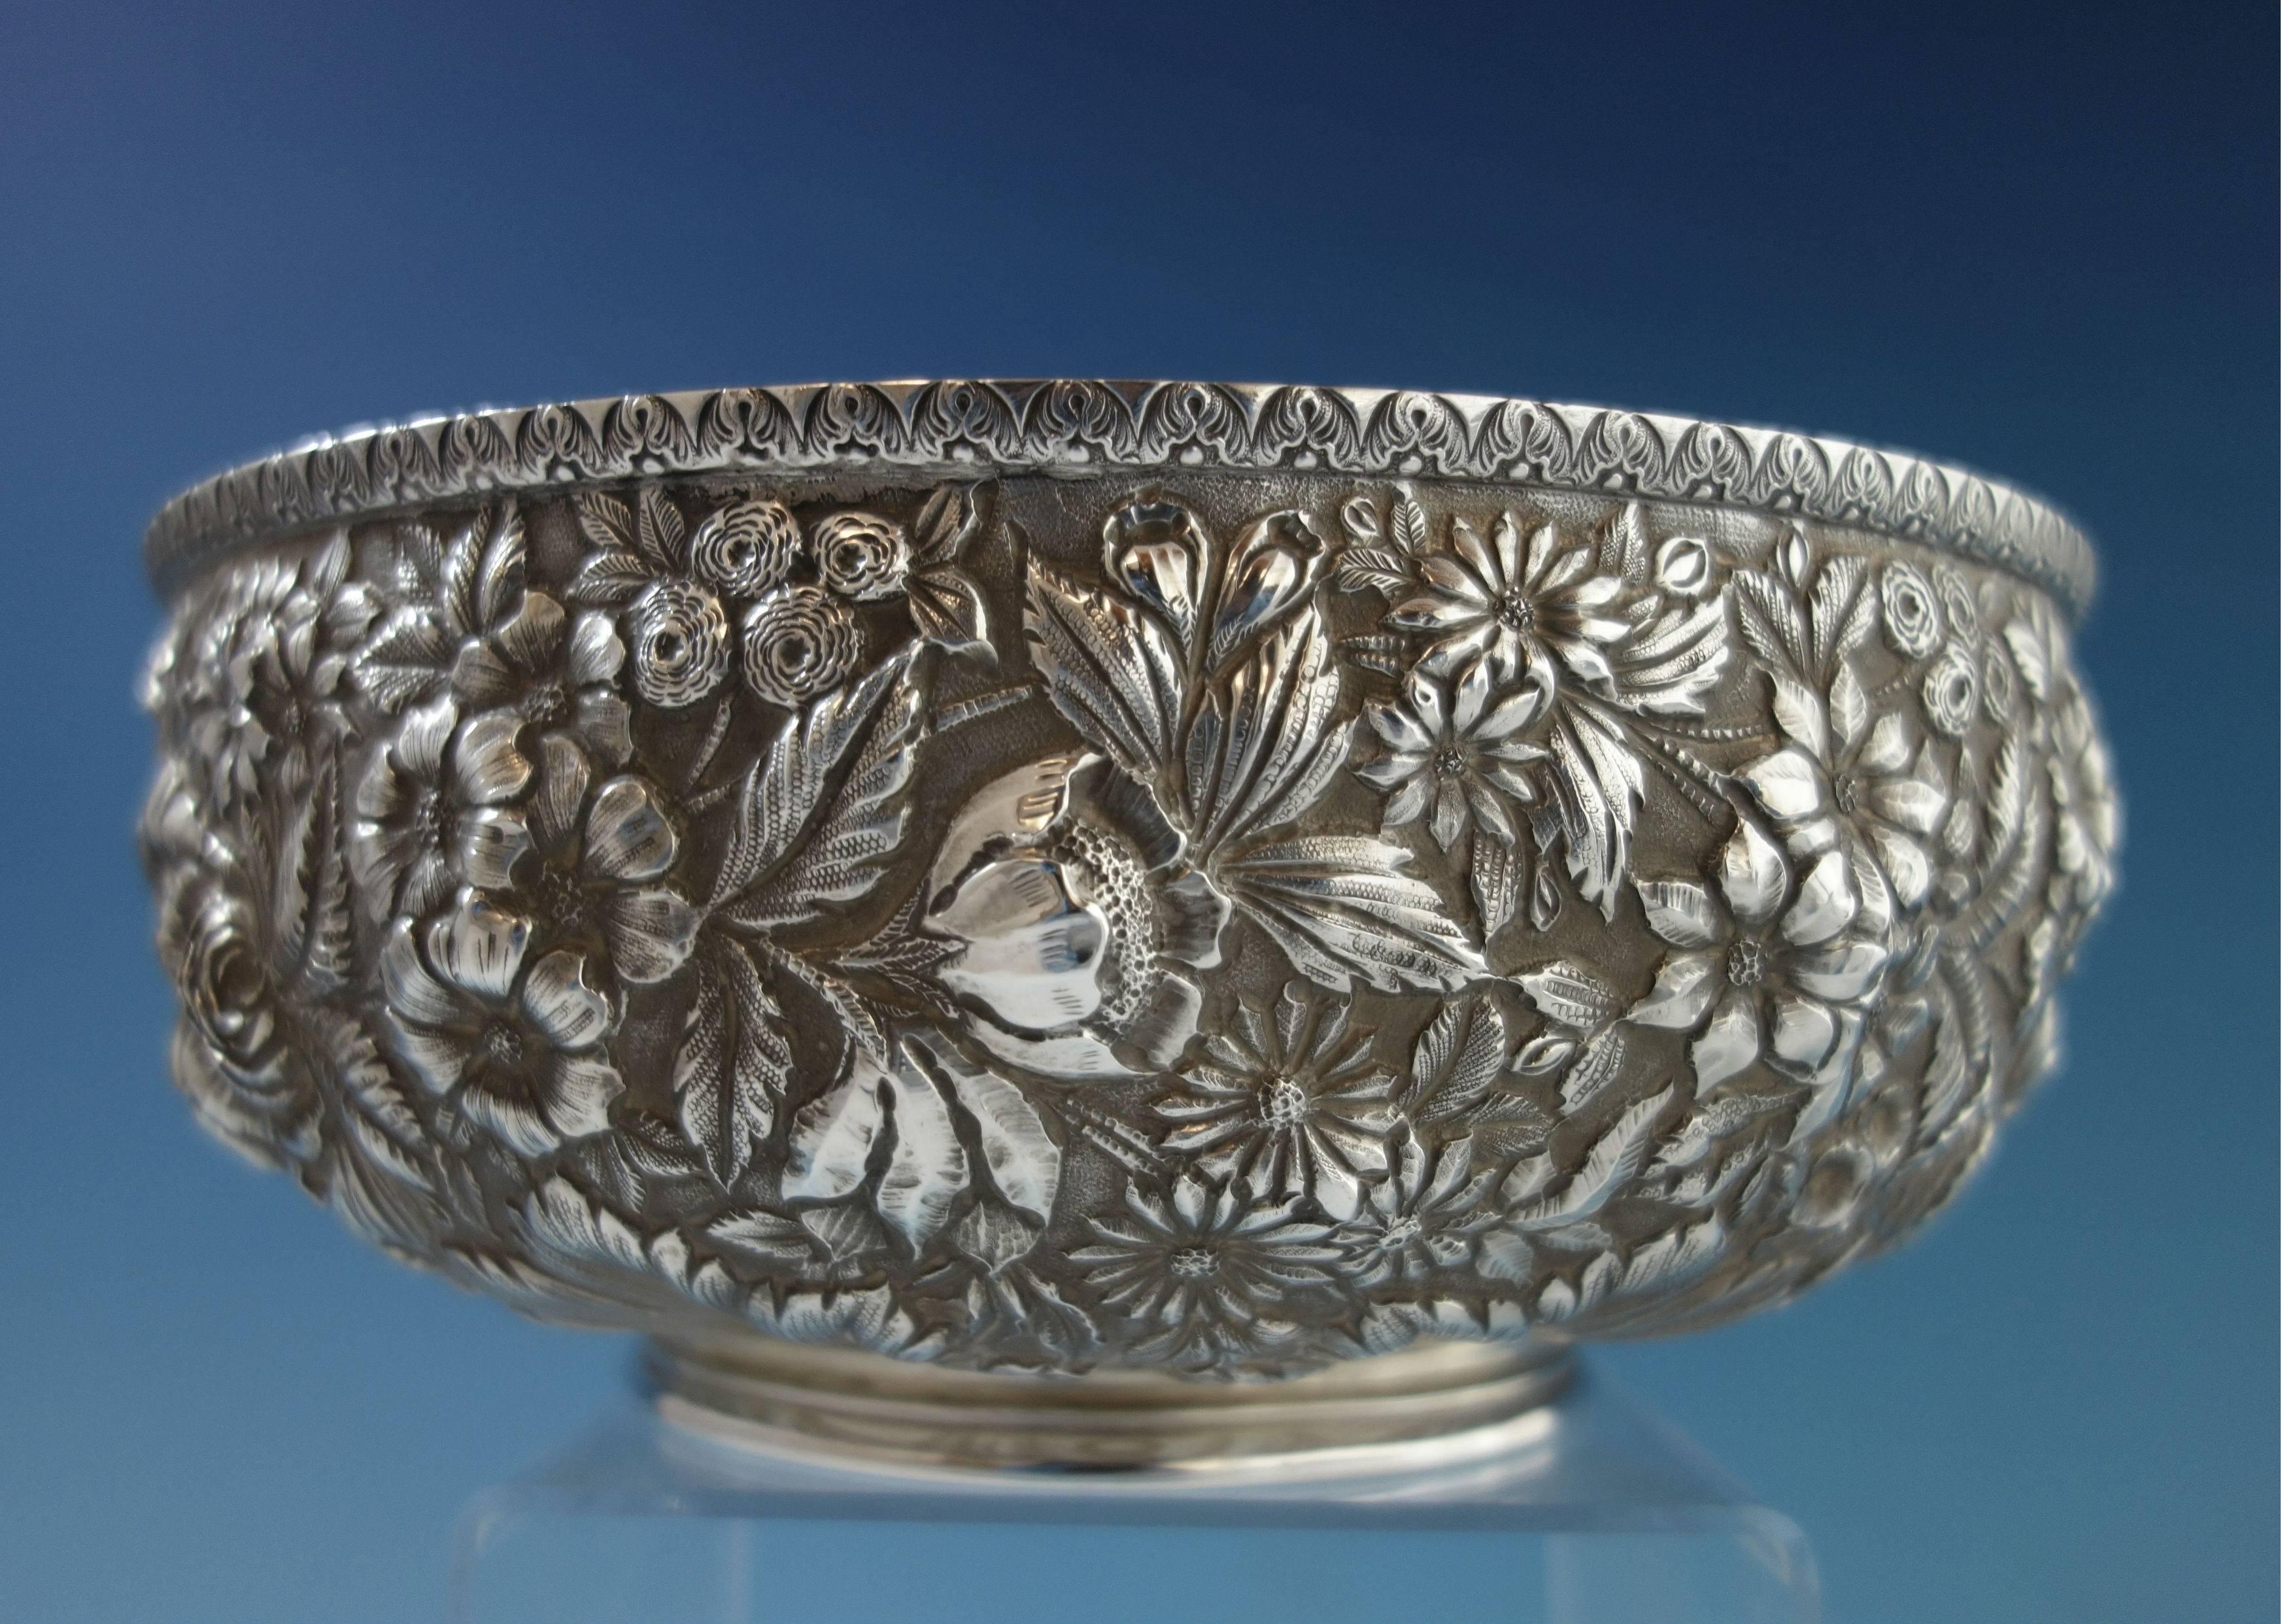 Repousse by Jenkins & Jenkins sterling silver footed fruit bowl. It is marked #188 and retailed by J.E. Caldwell. This piece weighs 19.7 troy ounces and measures 4 1/4" x 8 1/4" diameter. It is monogrammed on the underside (see photo),